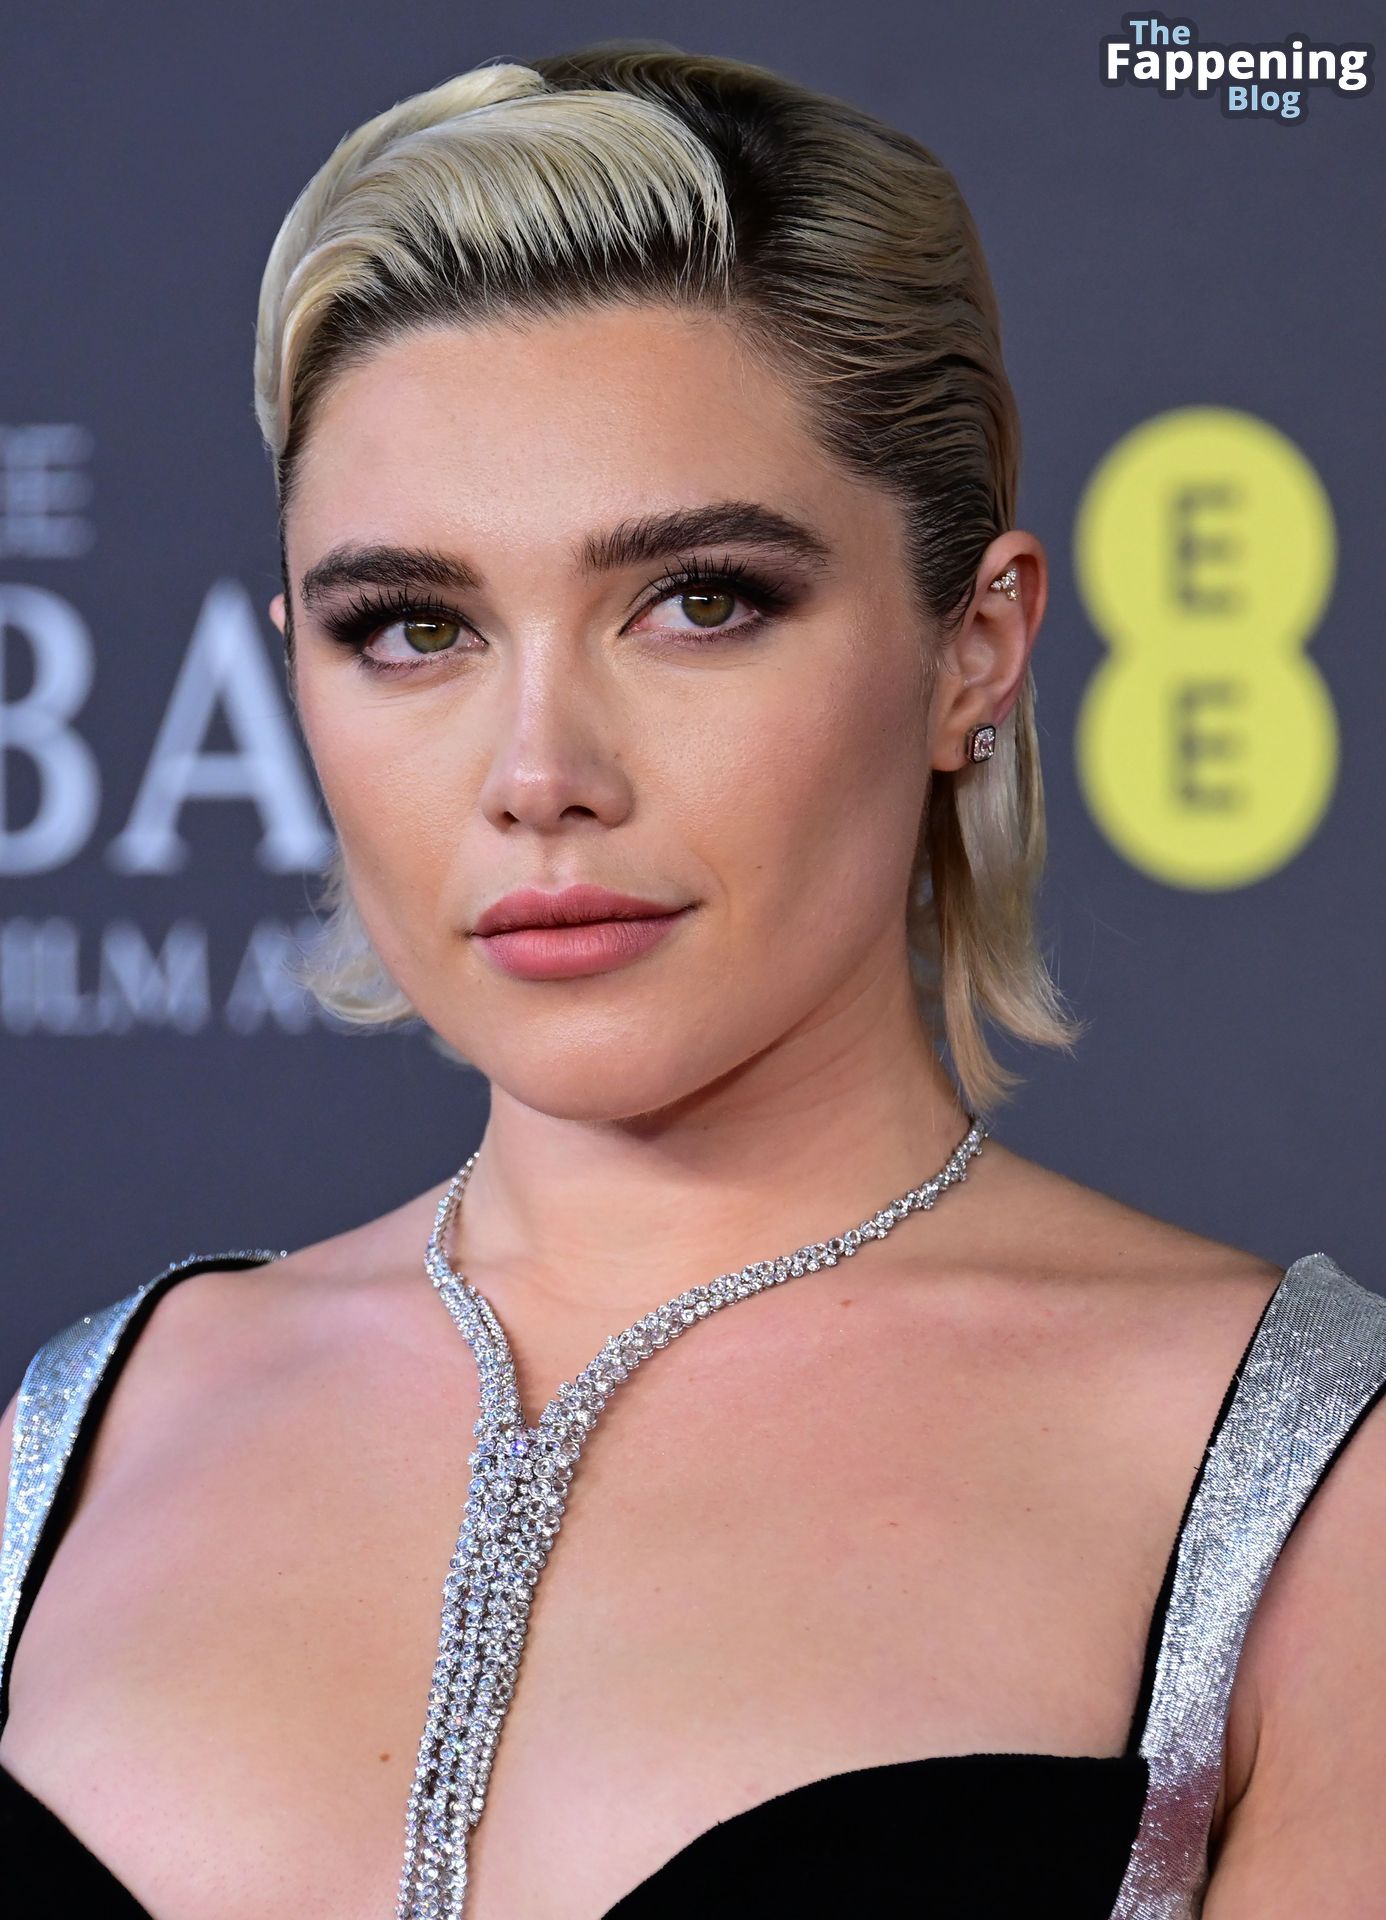 Florence-Pugh-Sexy-37-The-Fappening-Blog-2.jpg